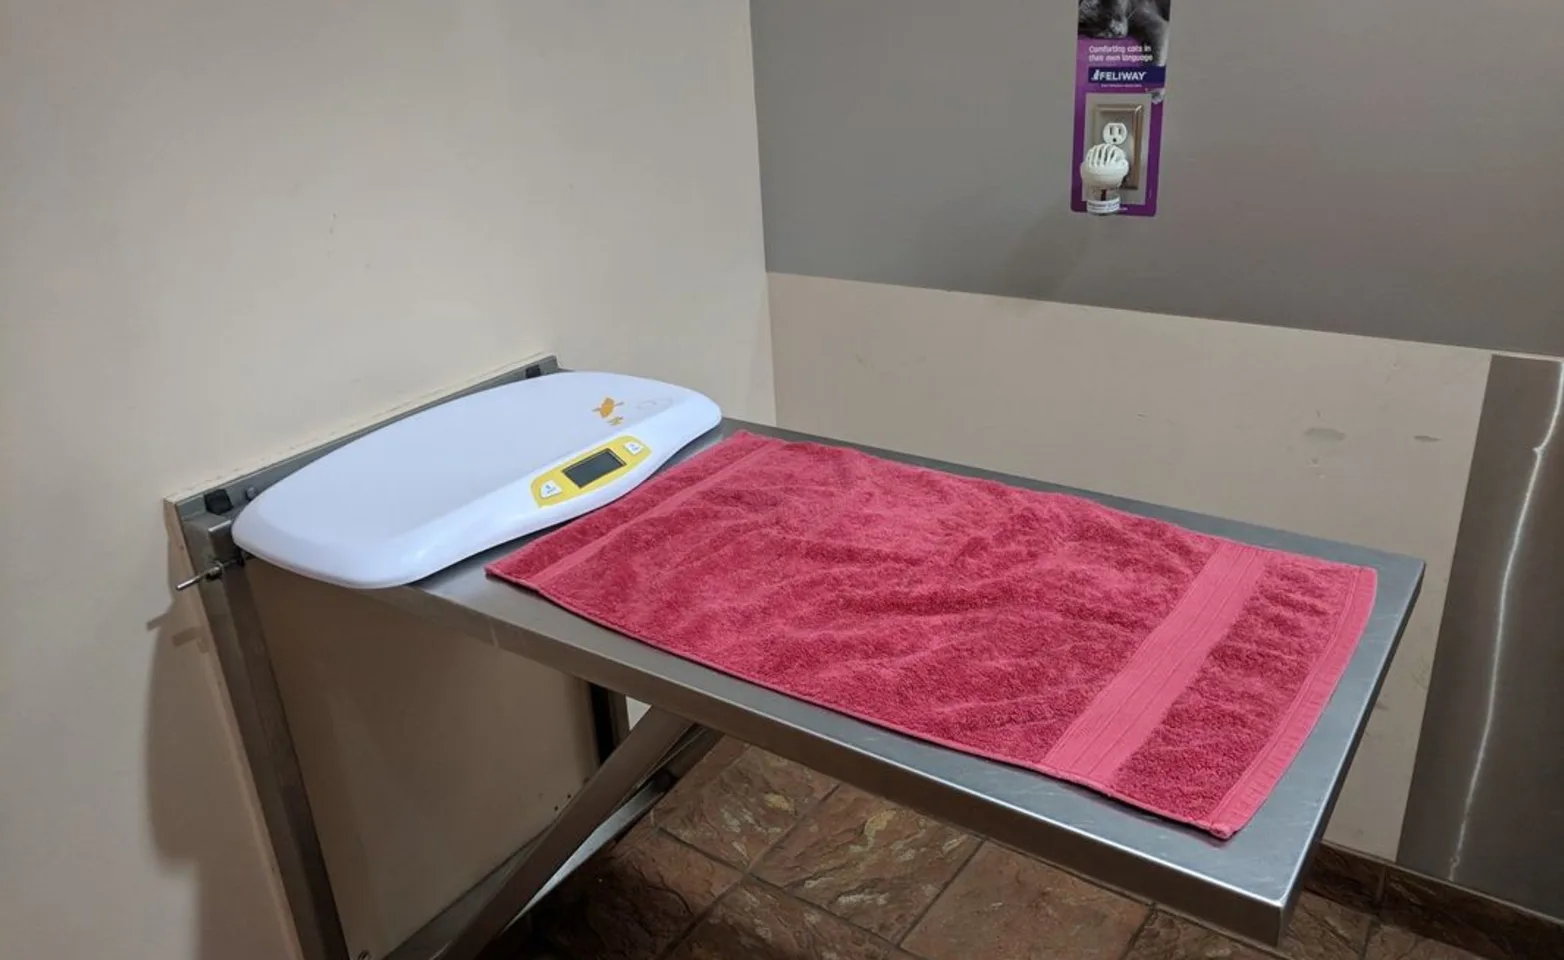 Digital scale and towel sitting on exam table at Abbotsford Animal Hospital